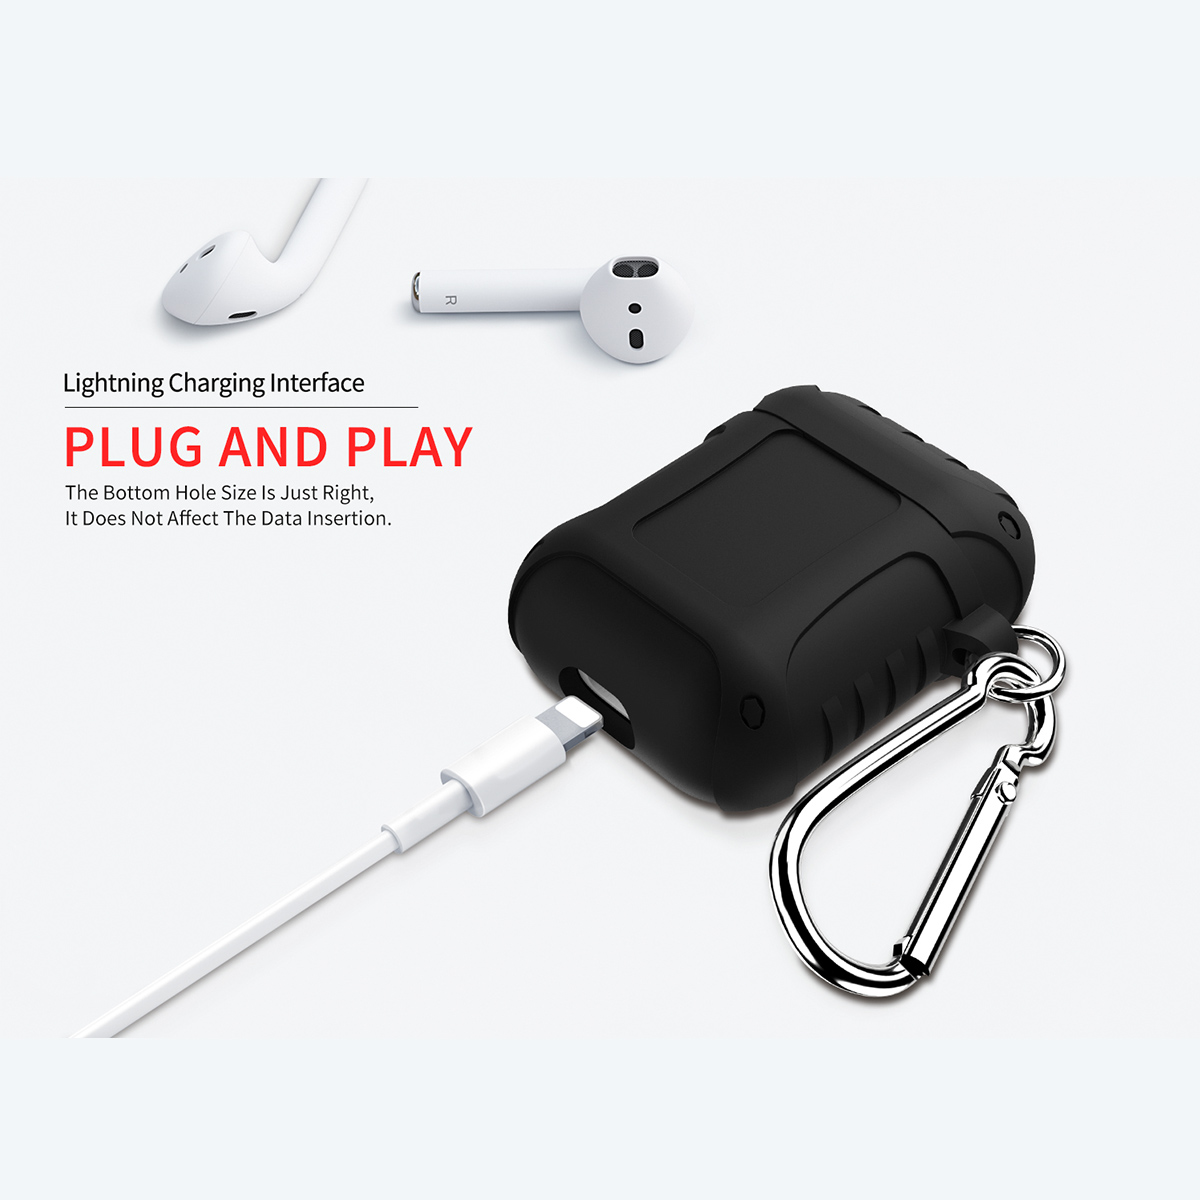 Pure-Armor-Design-Soft-Silicone-Shockproof-Earphone-Storage-Case-Cover-with-Keychain-for-Apple-Airpo-1790438-6